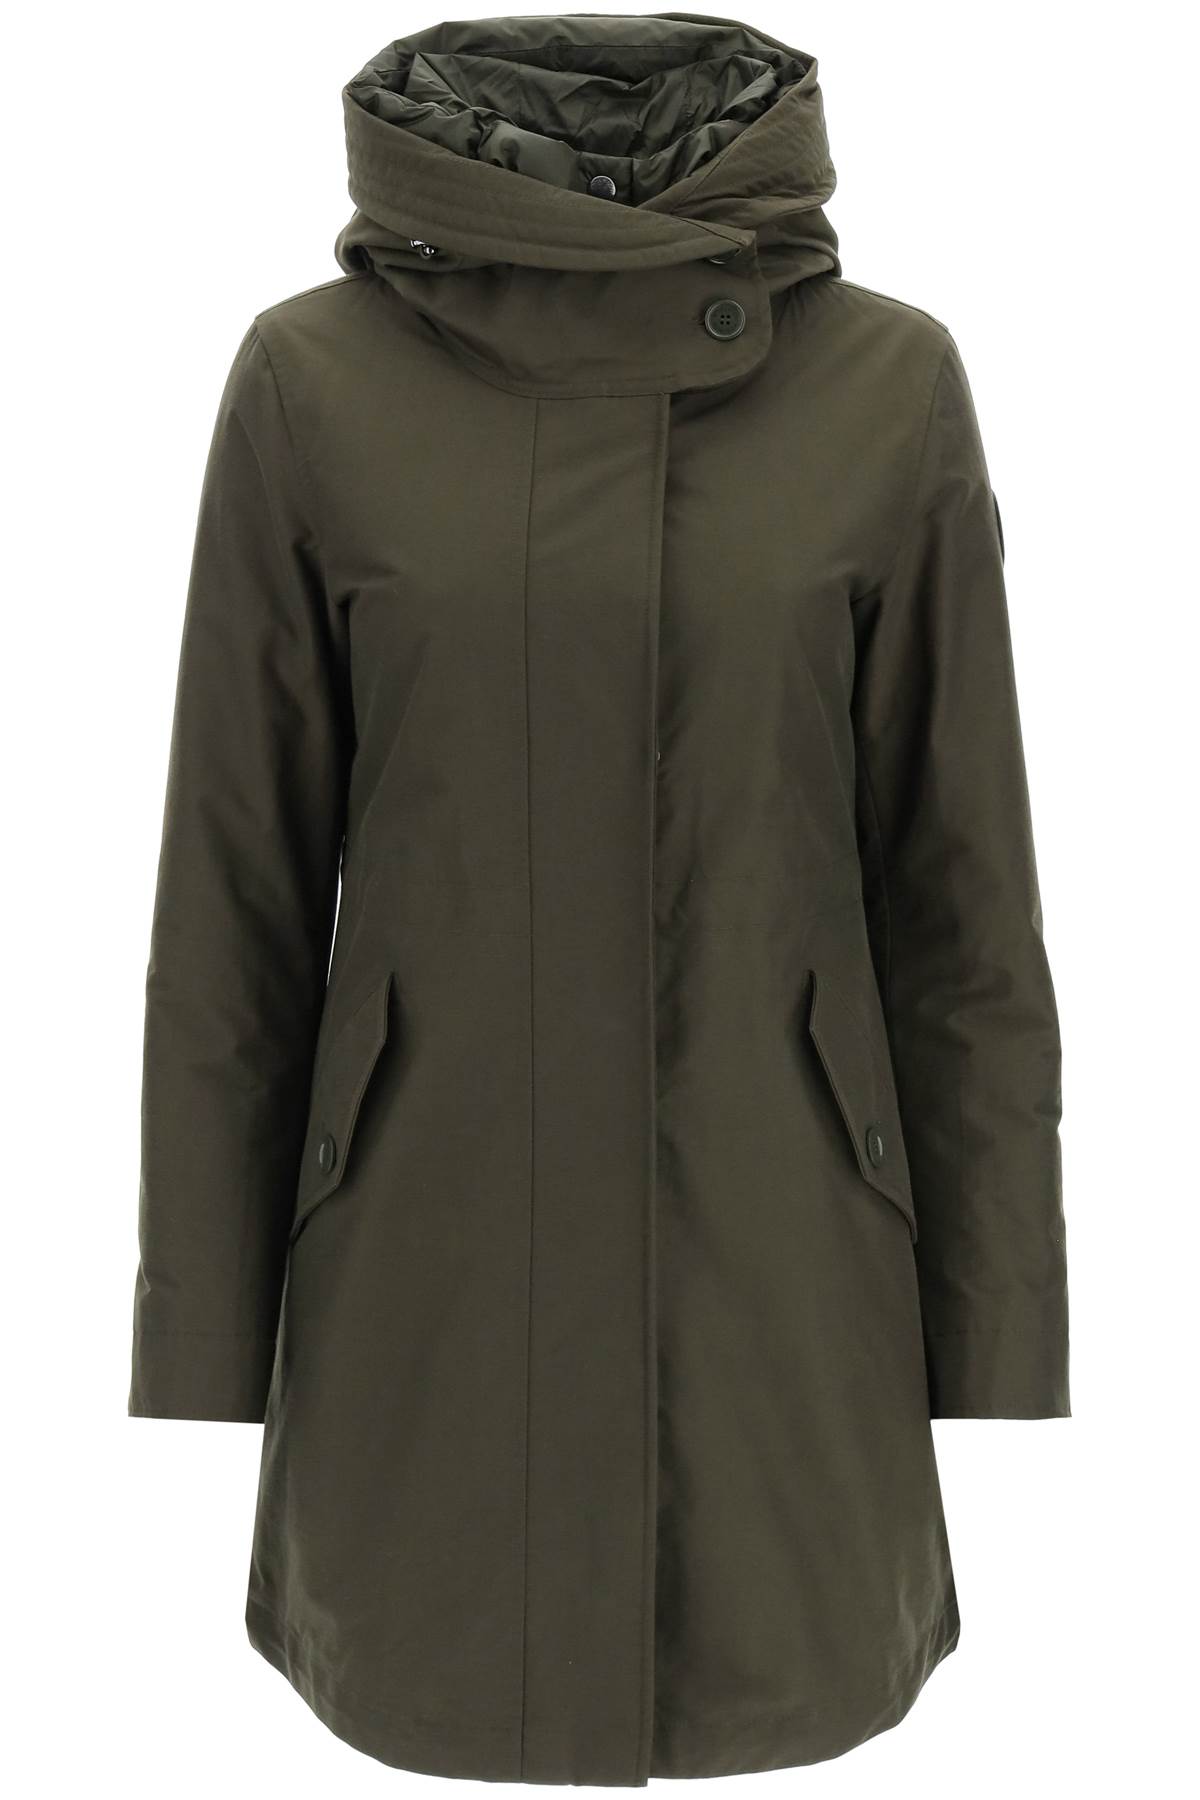 WOOLRICH MILITARY 3-IN-1 PARKA